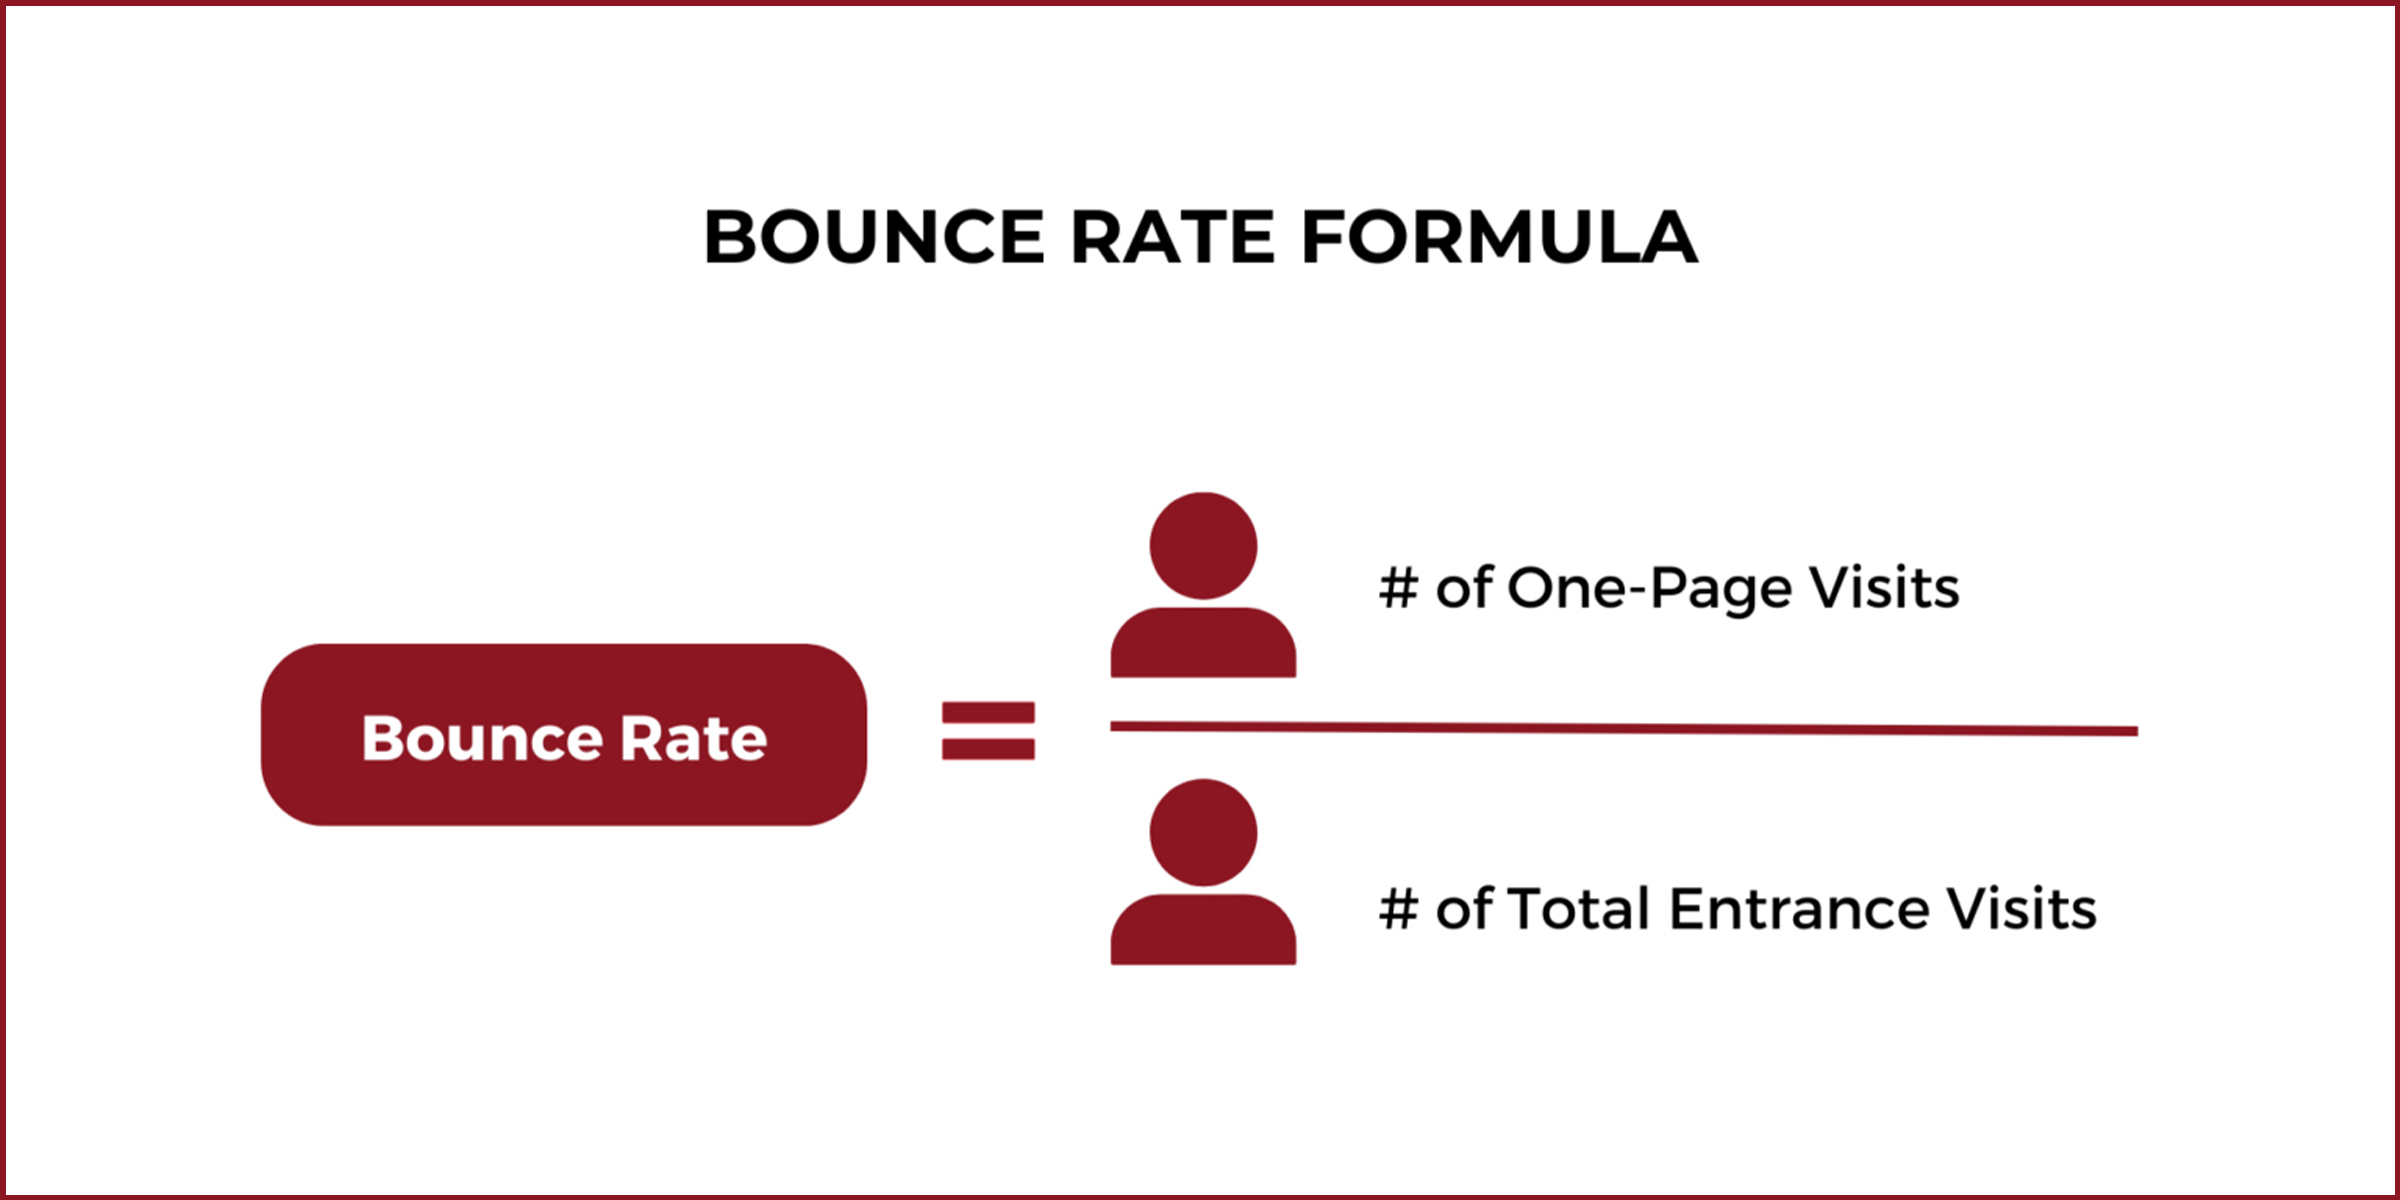 Reduce-Bounce-Rate